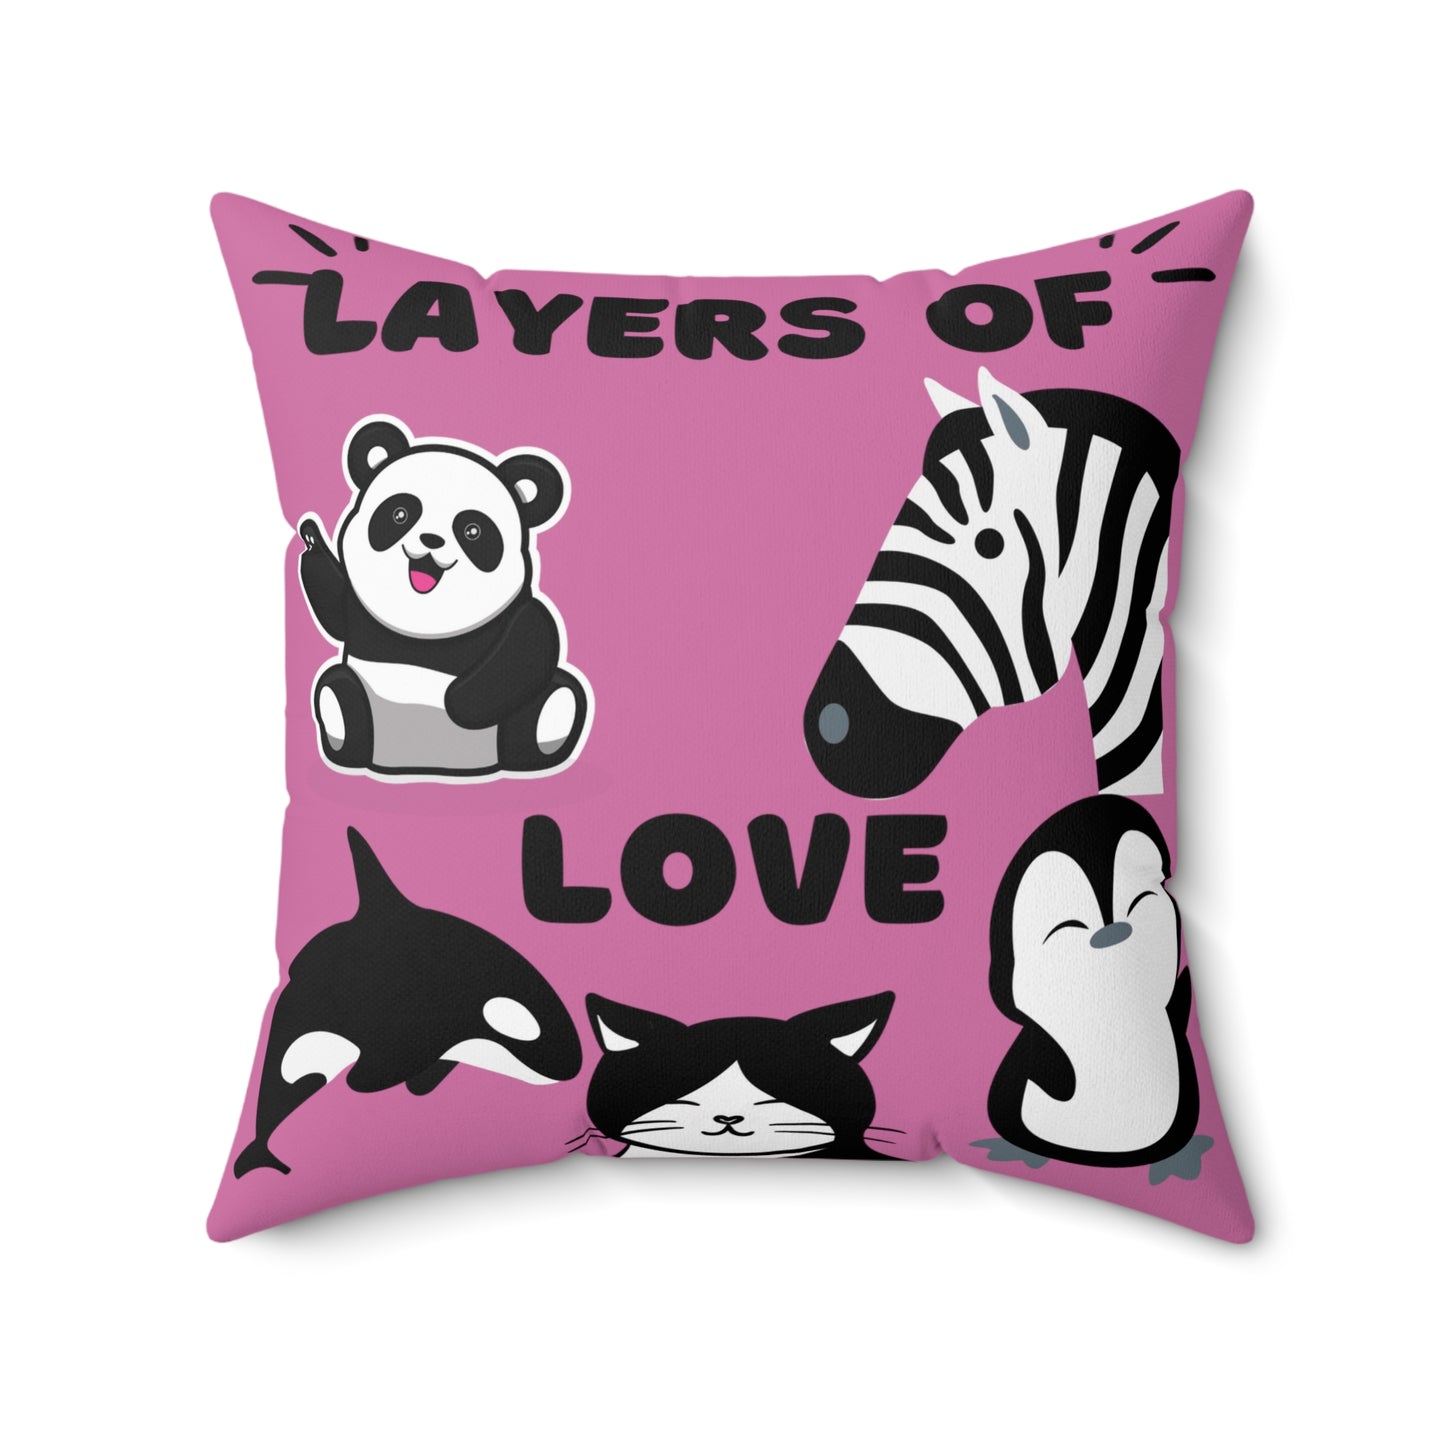 Layers of Love Spun Polyester Square Pillow